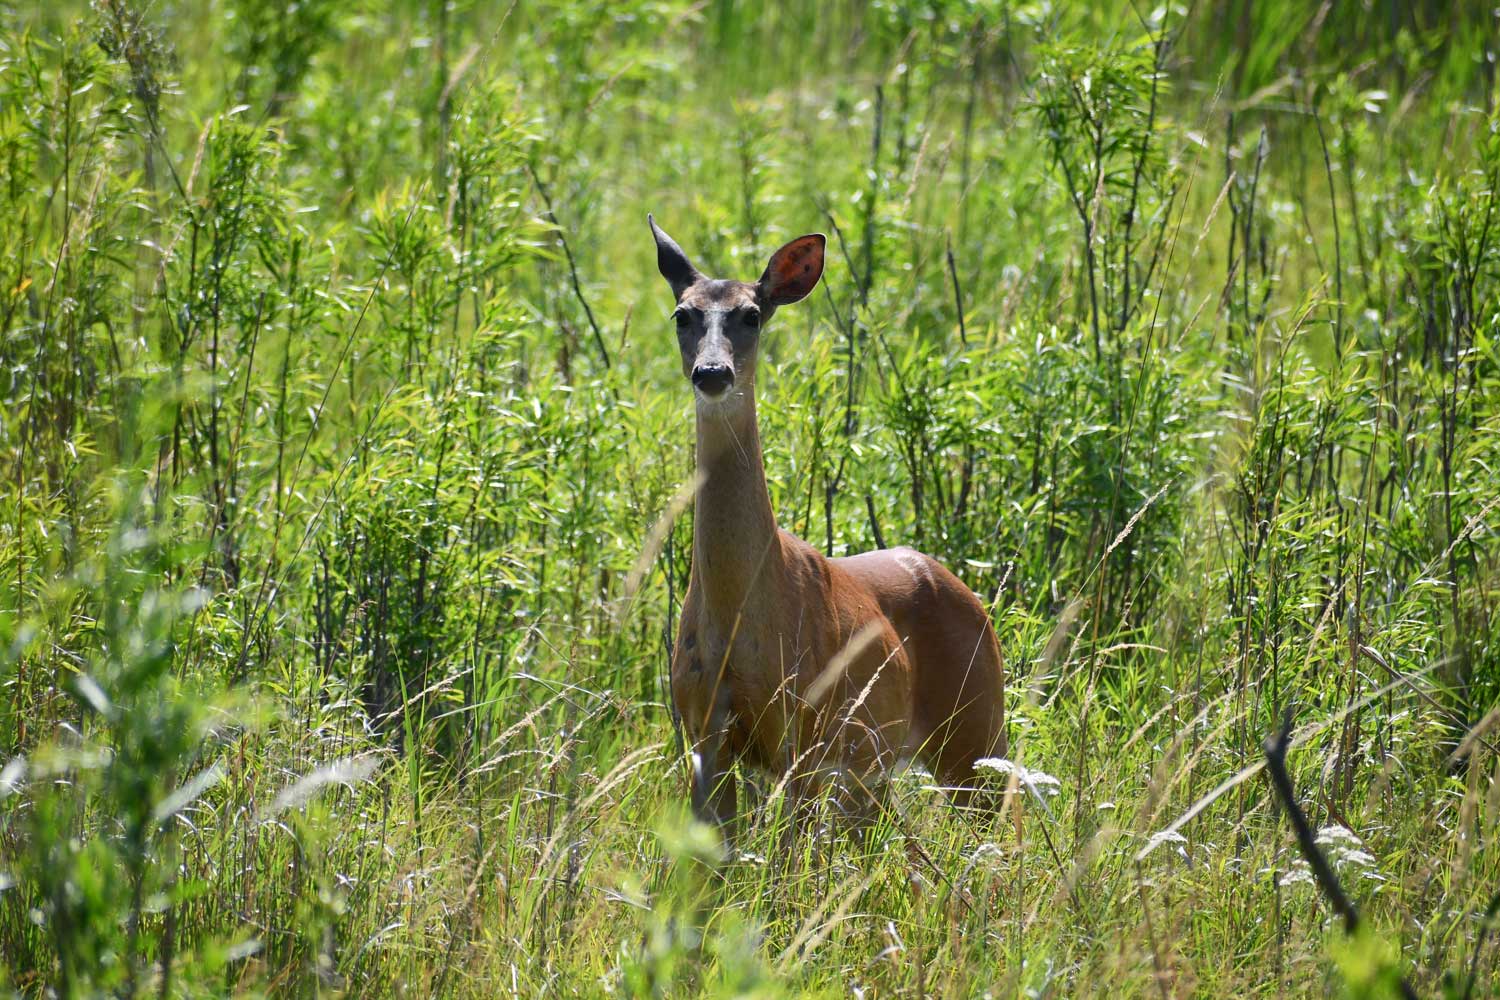 White tailed deer standing in grass.